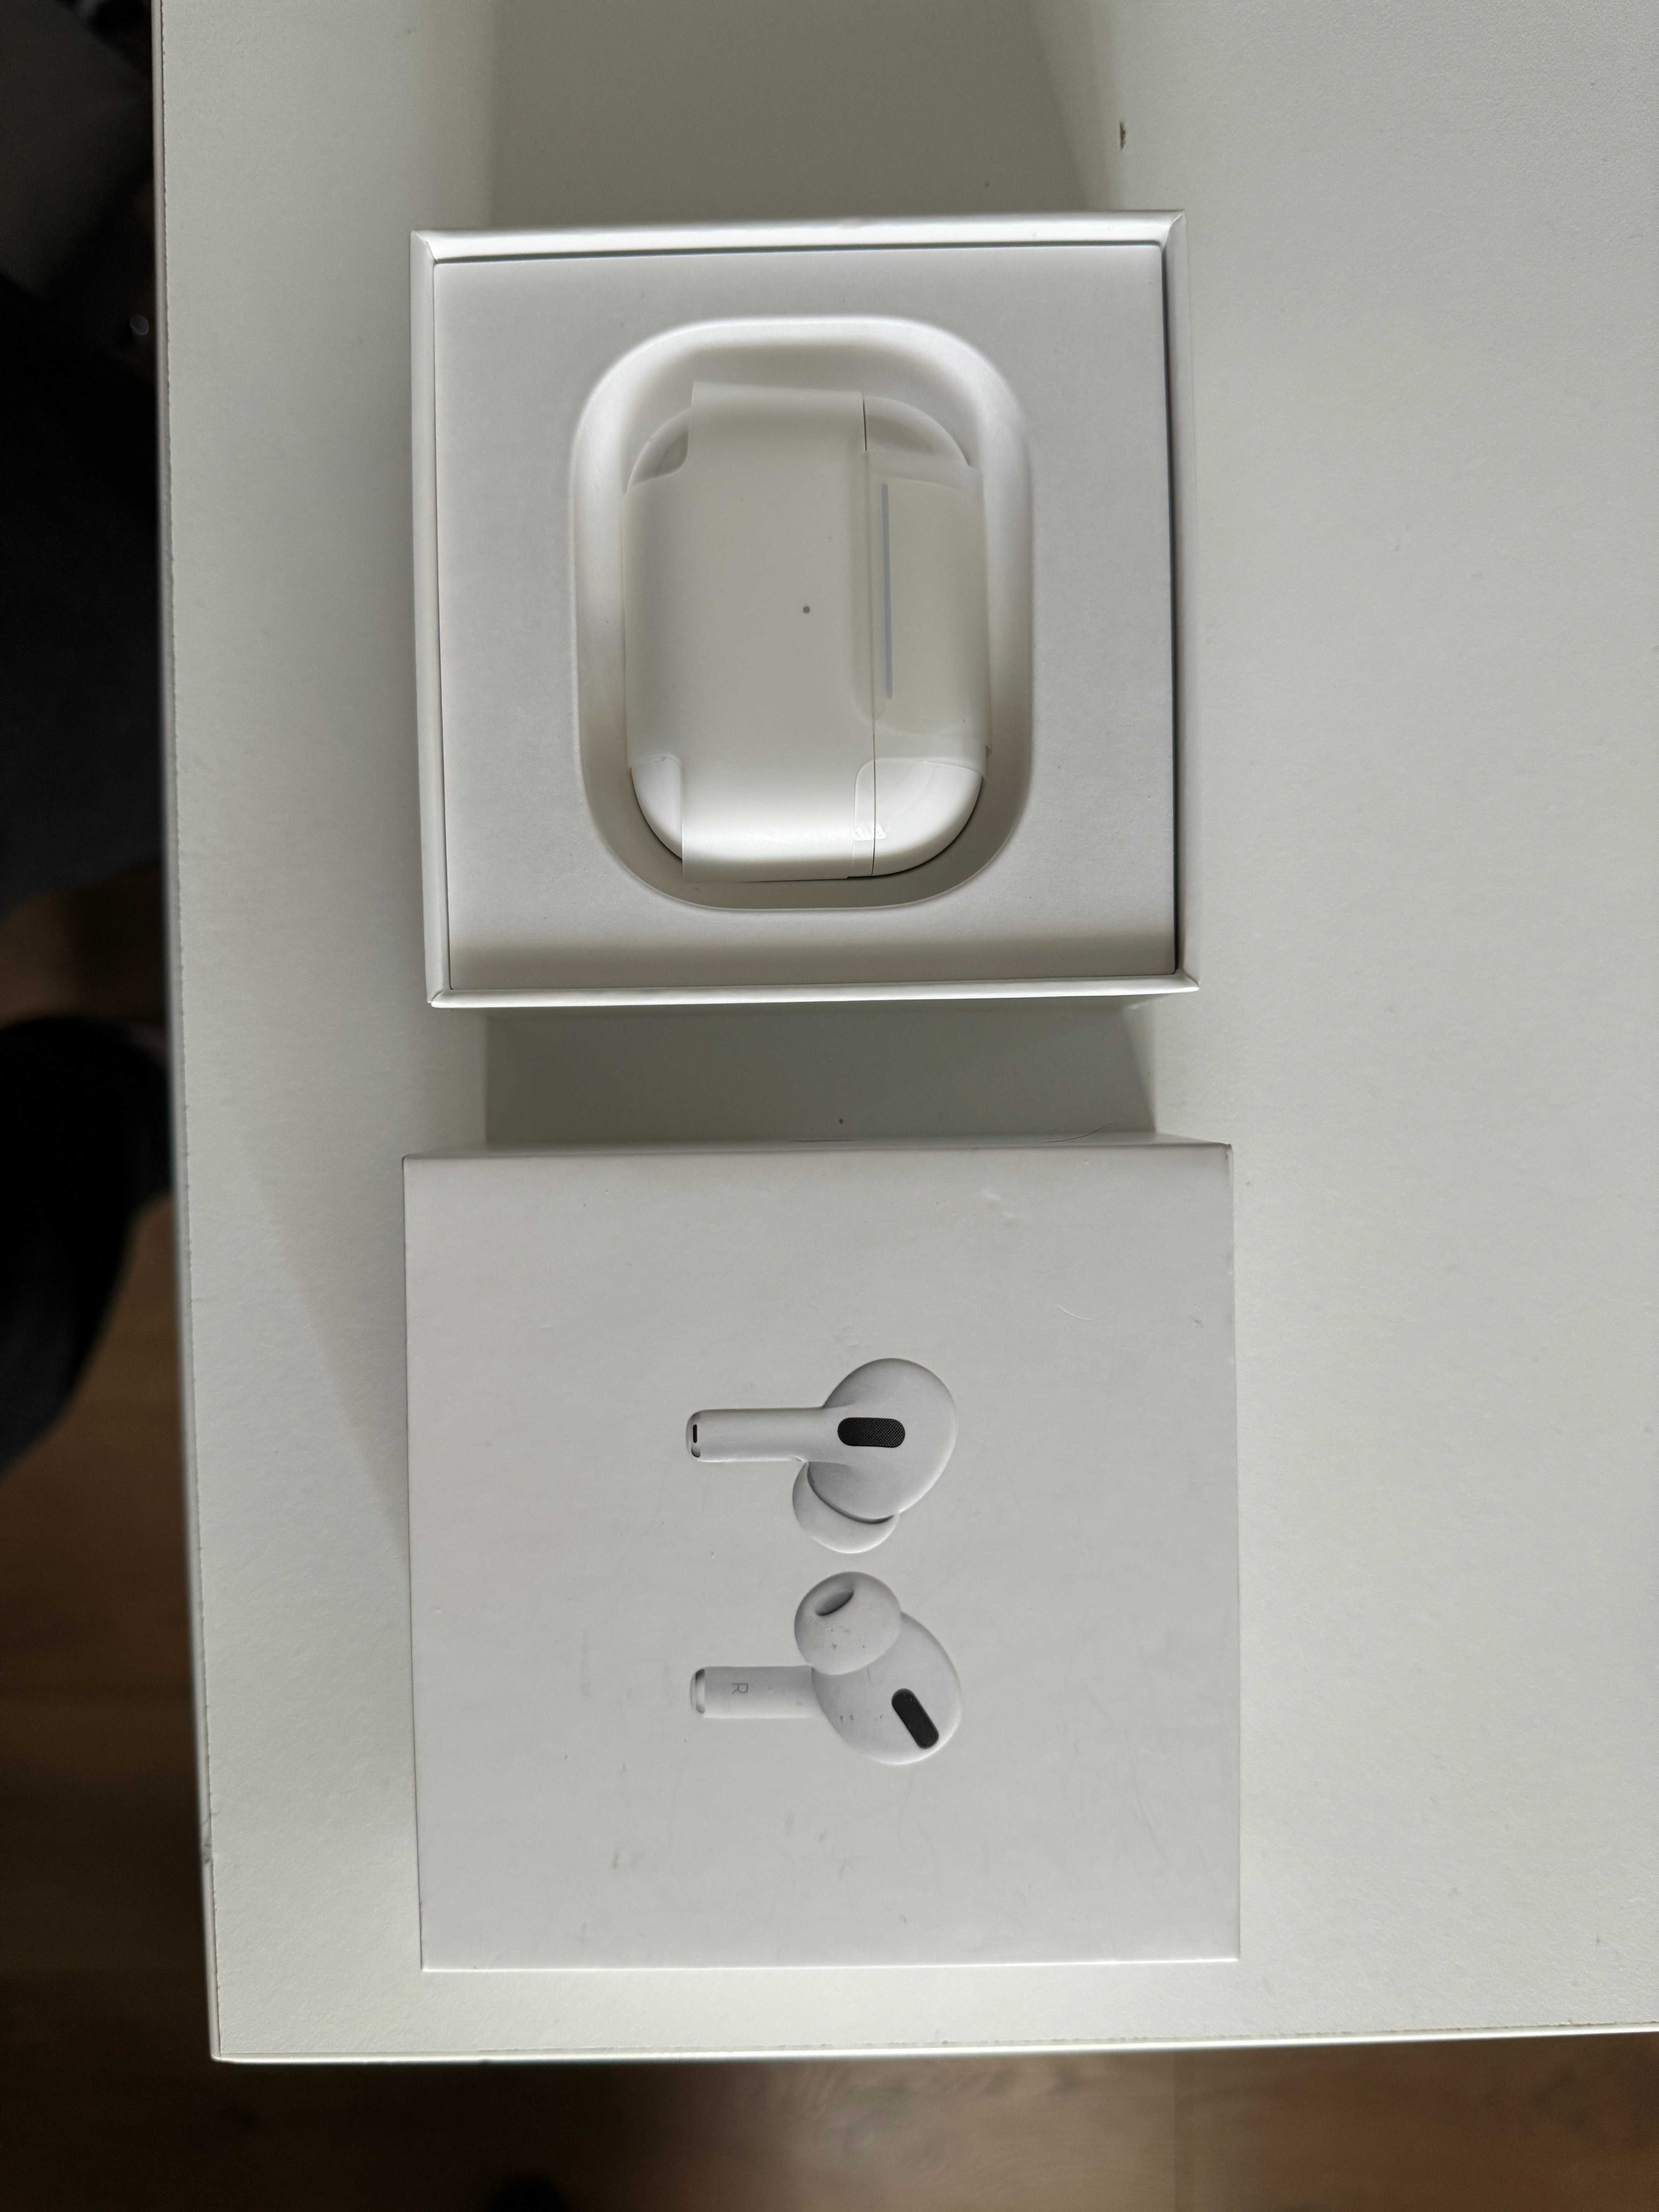 Apple Airpods mwp22zm/a